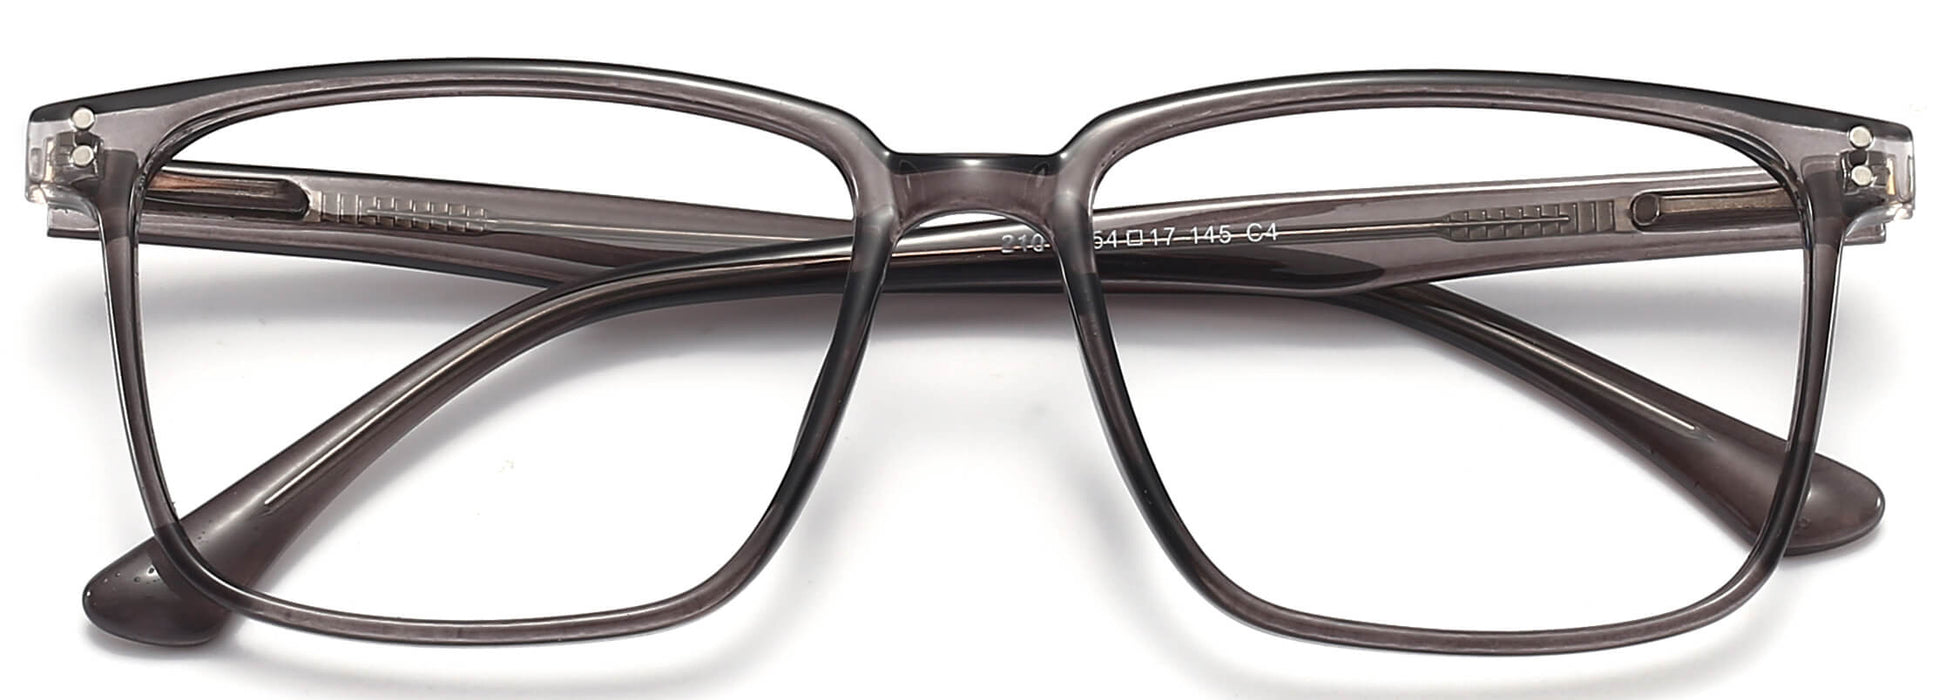 Tadeo Square Gray Eyeglasses from ANRRI, closed view